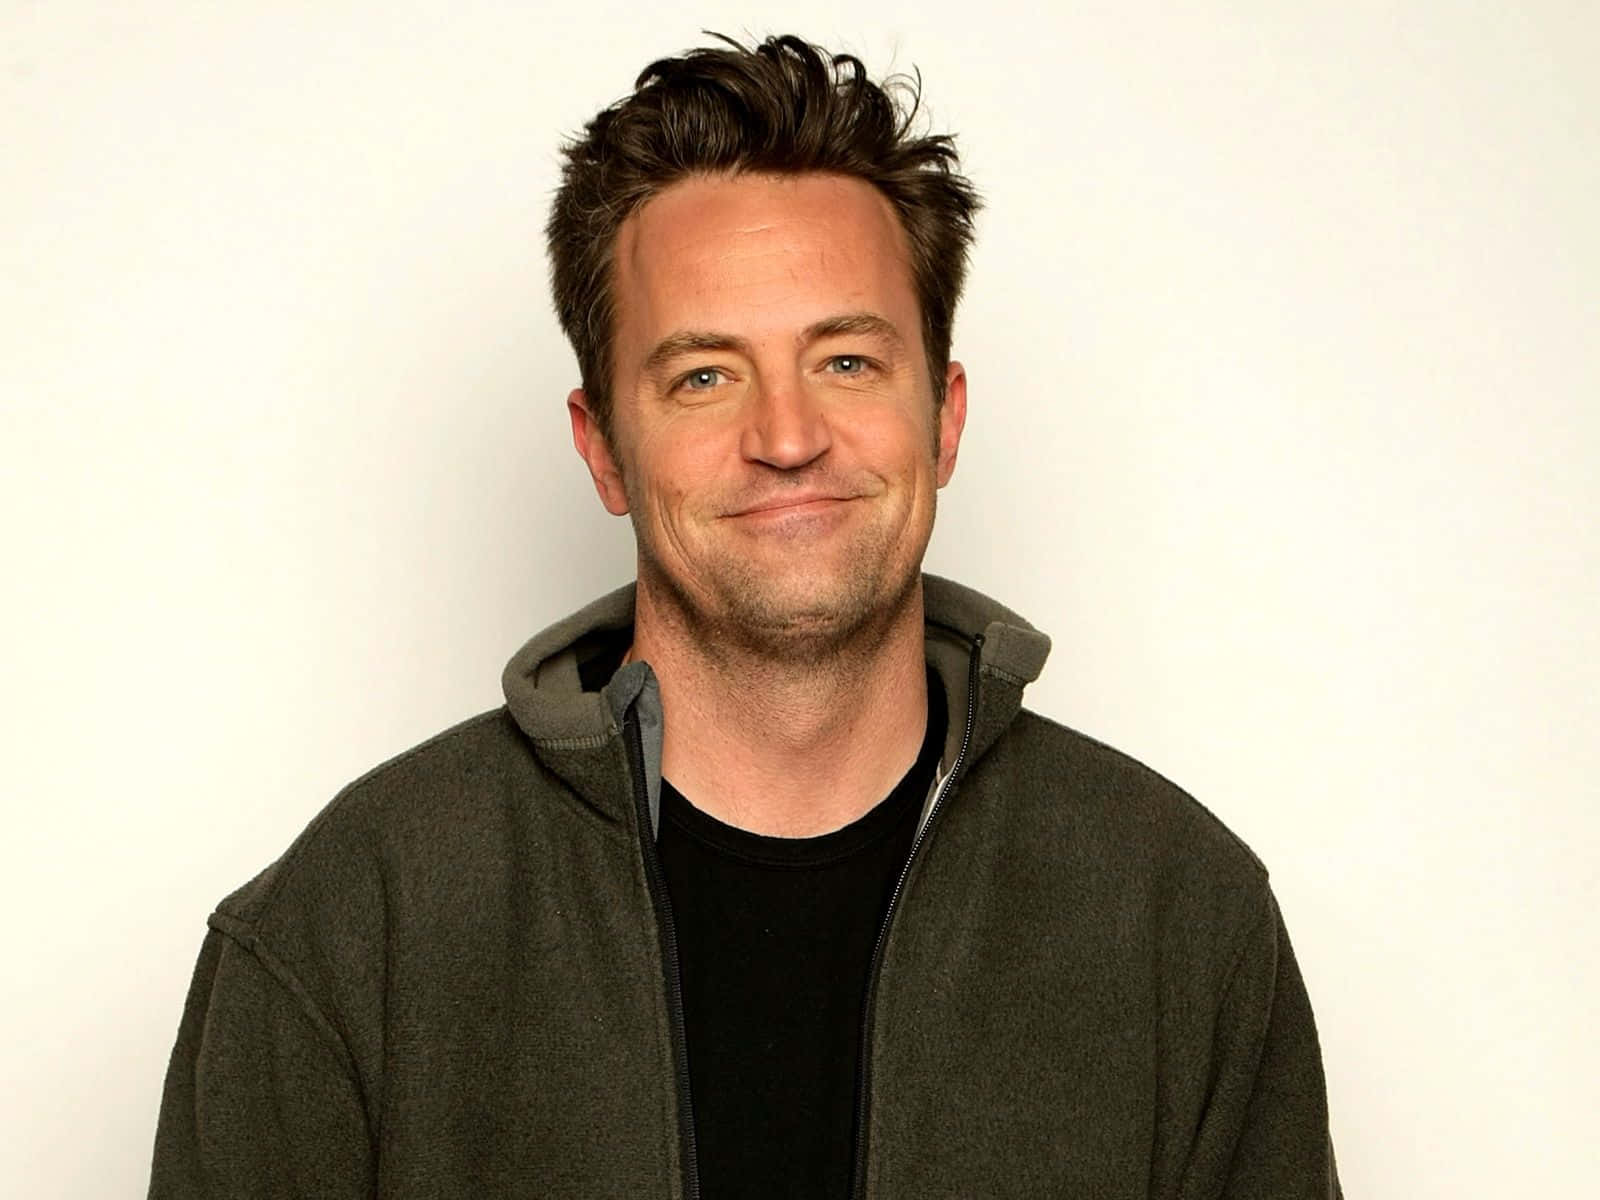 Matthew Perry, the funnyman best known for his role as Chandler Bing on Friends" Wallpaper